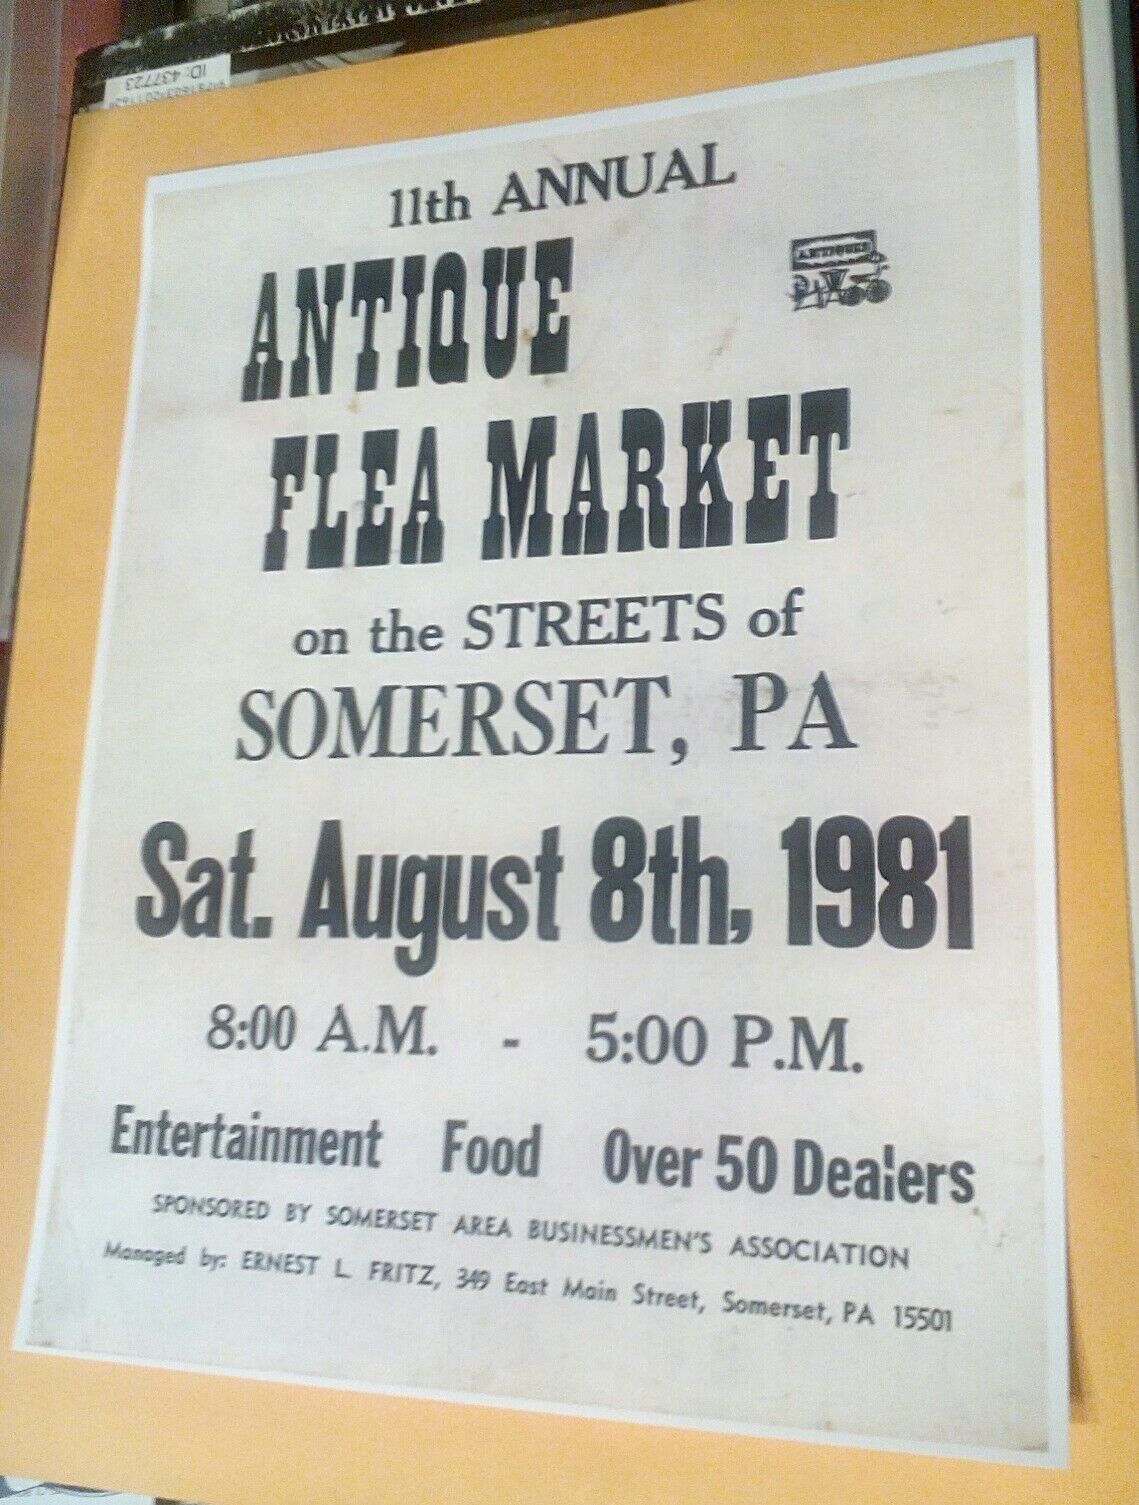 1981 Streets Of Somerset PA. Antique Flea Market 11th Annual RARE Poster